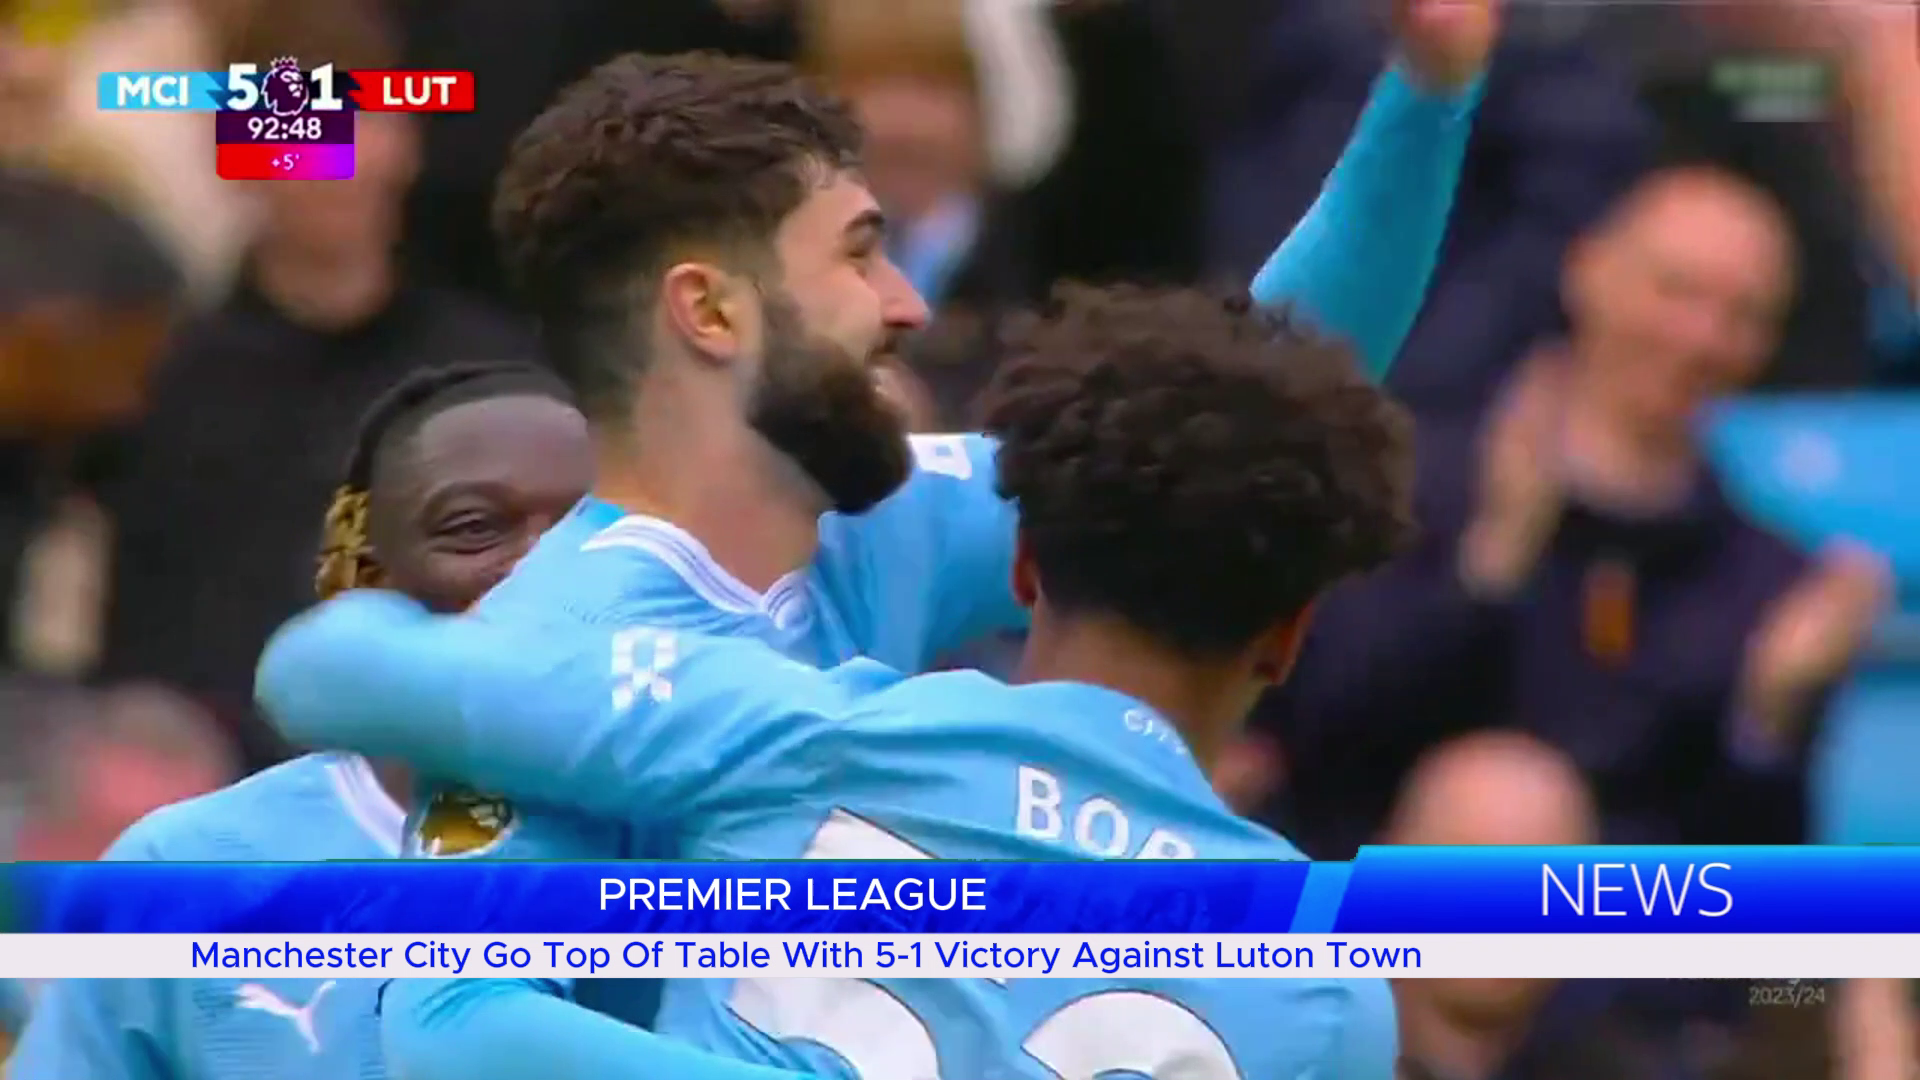 Manchester City Go Top Of Table With 5-1 Victory Against Luton Town